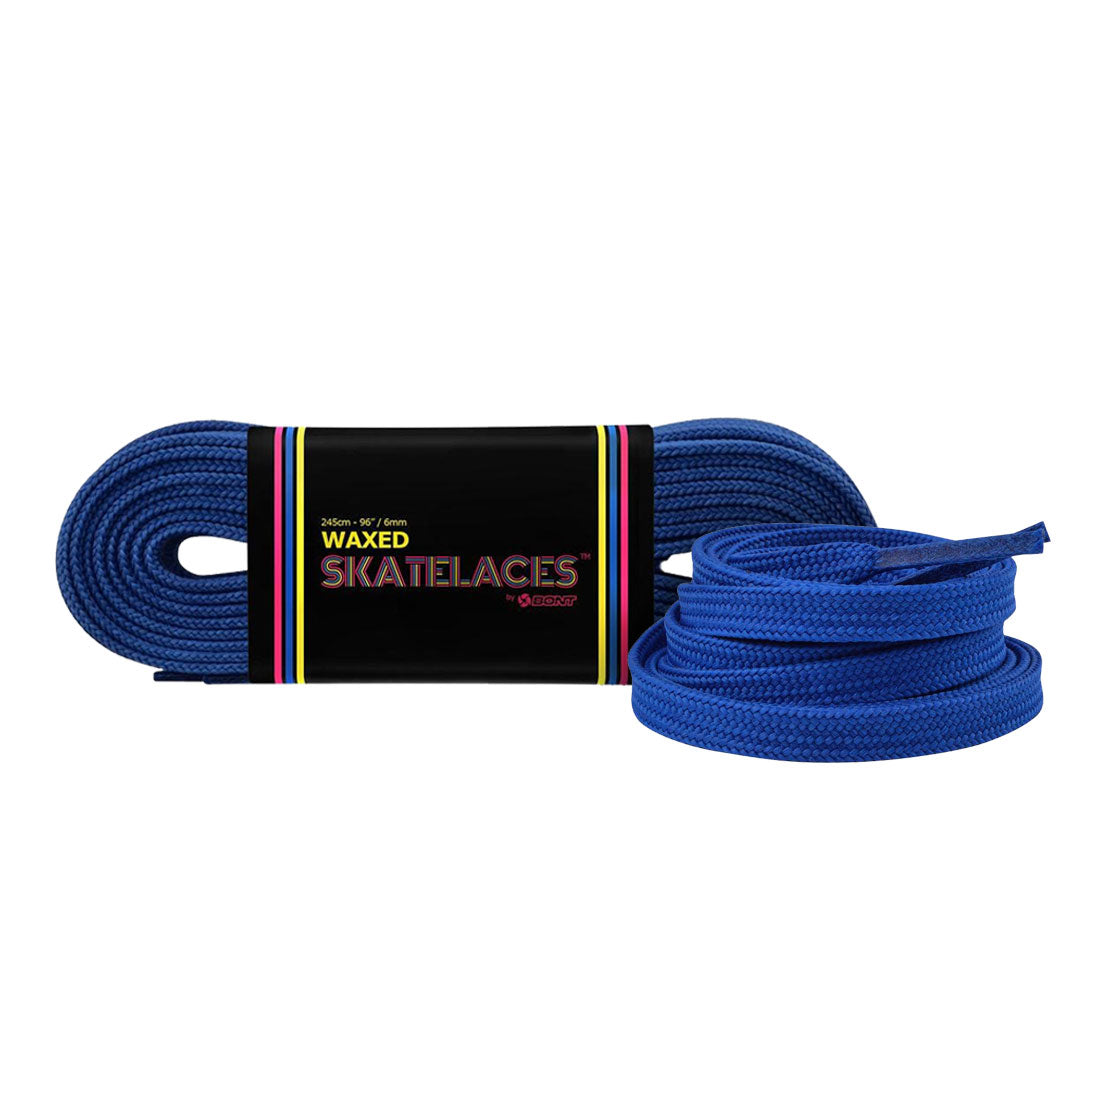 Bont Waxed 8mm Laces - 120cm/47in Mad About You Blue Laces